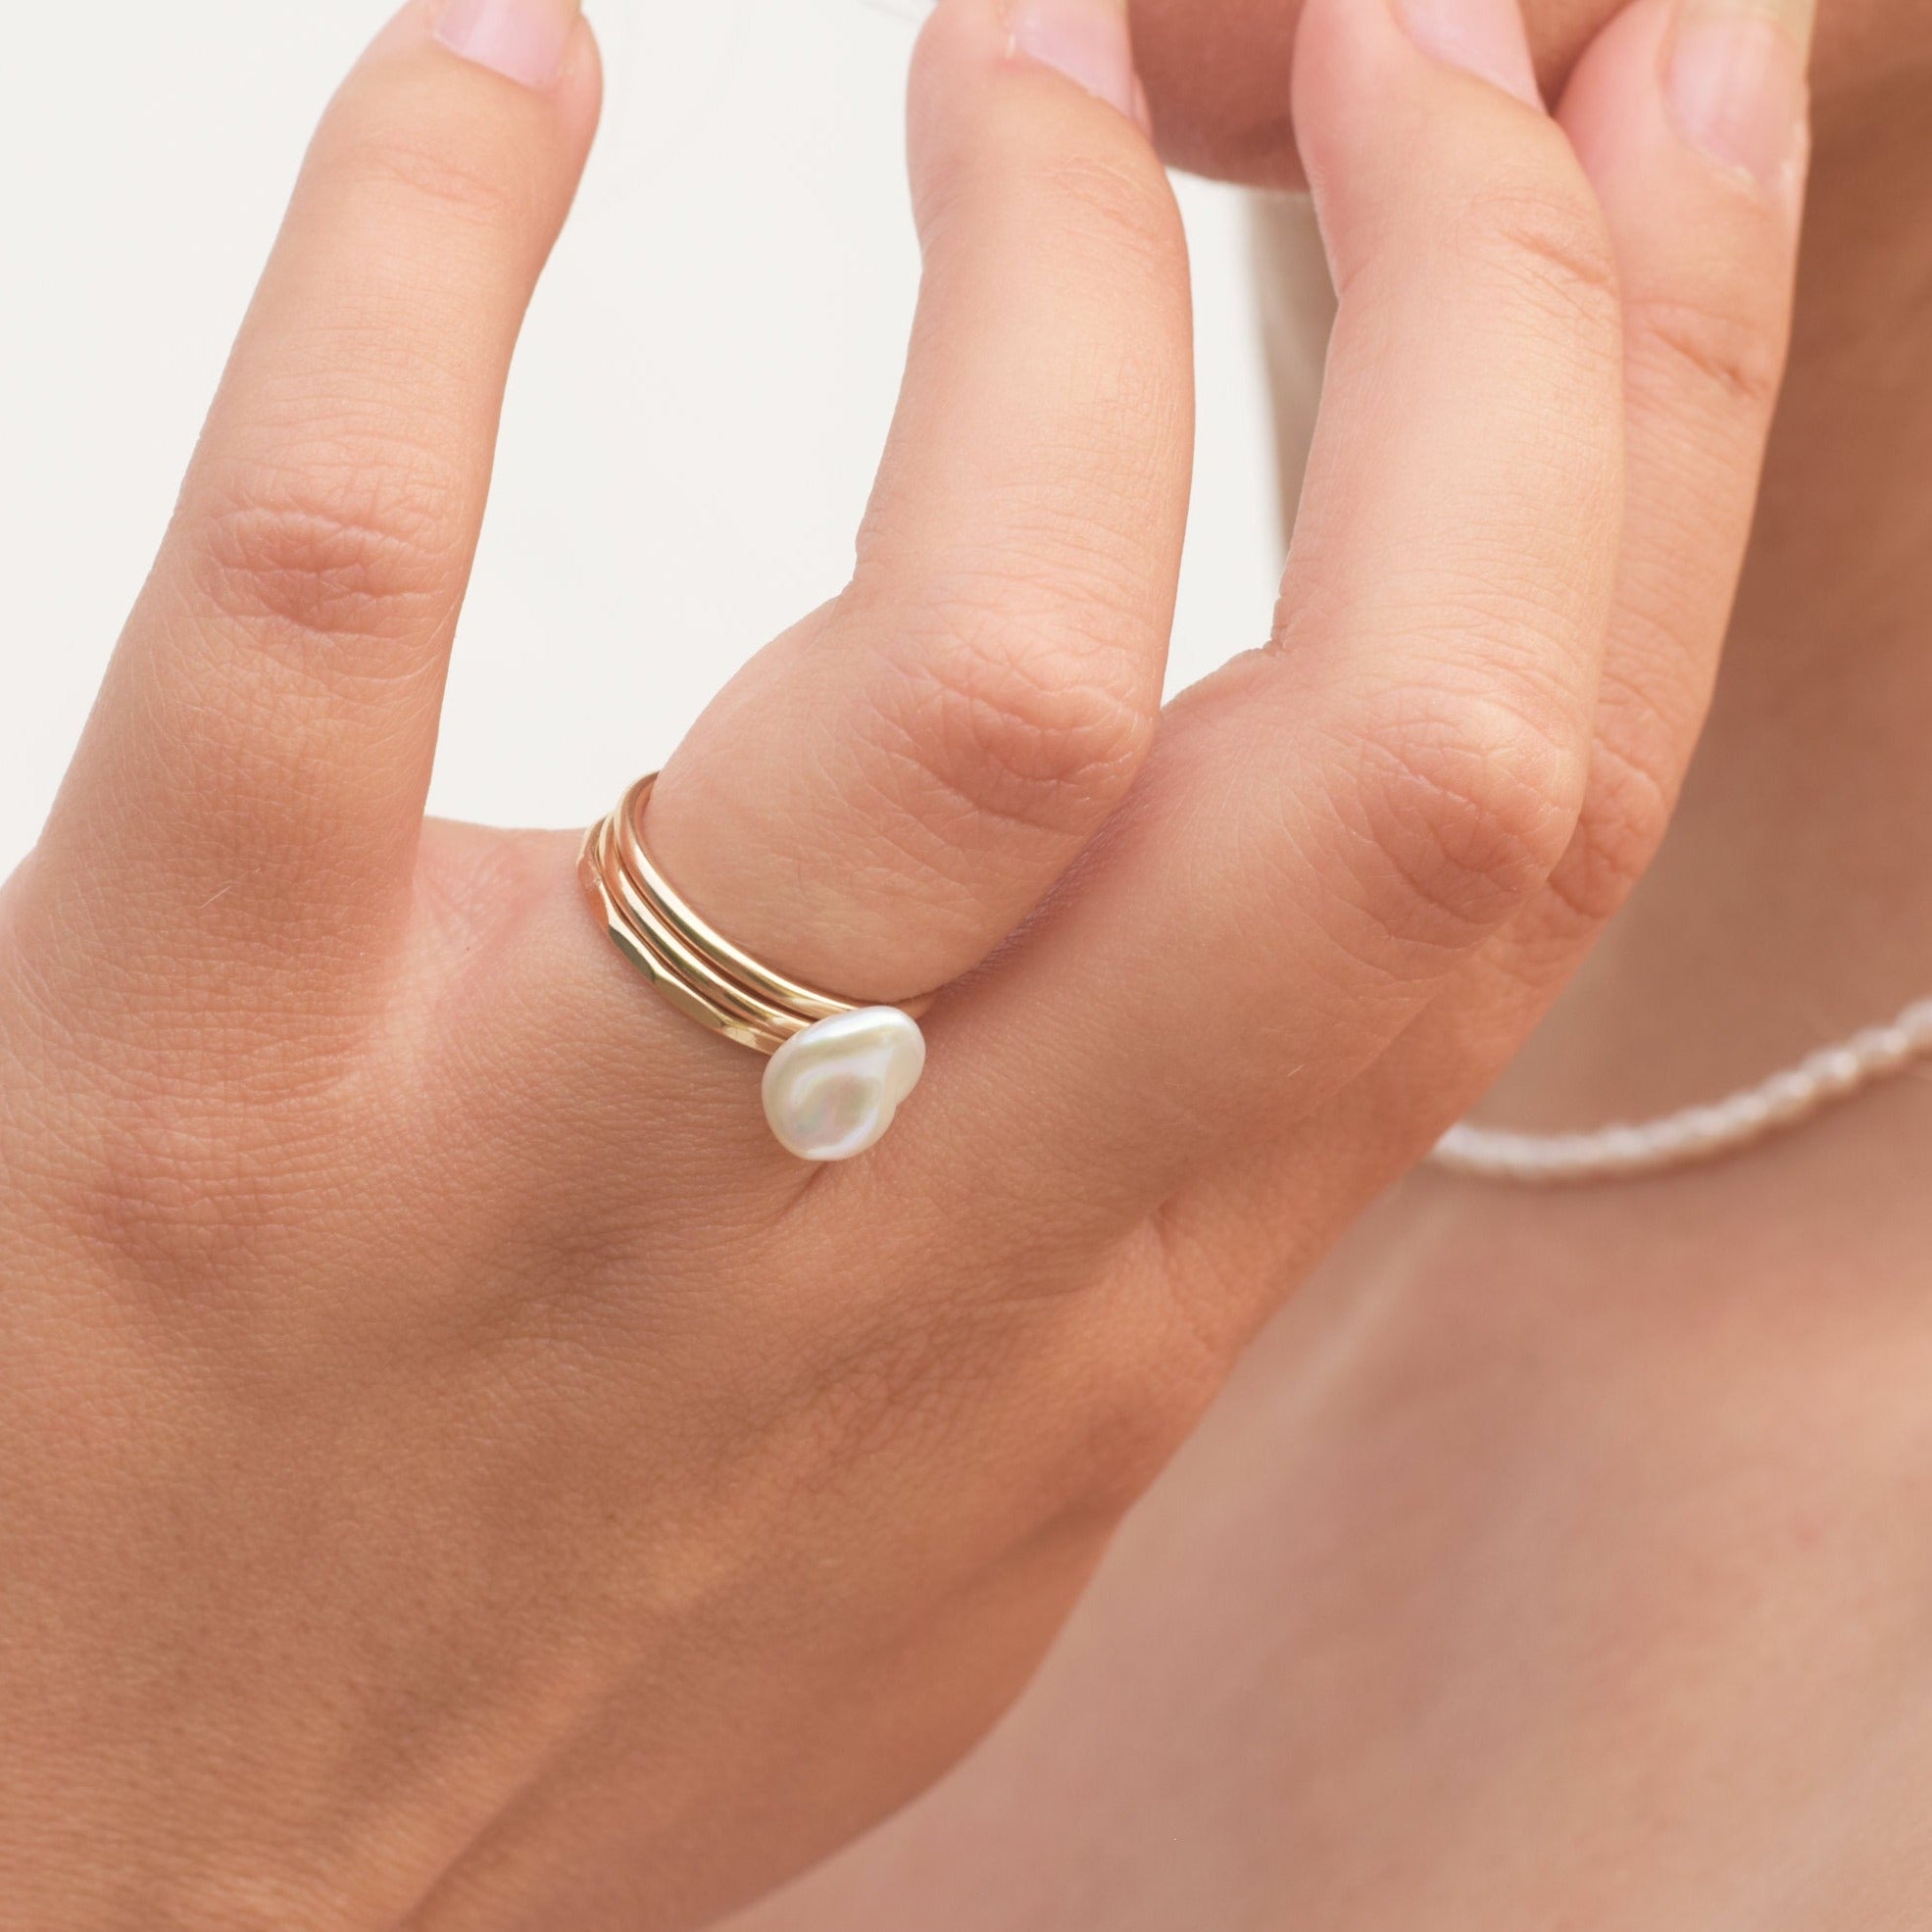 trio of pearl and gold filled stacking rings on hand